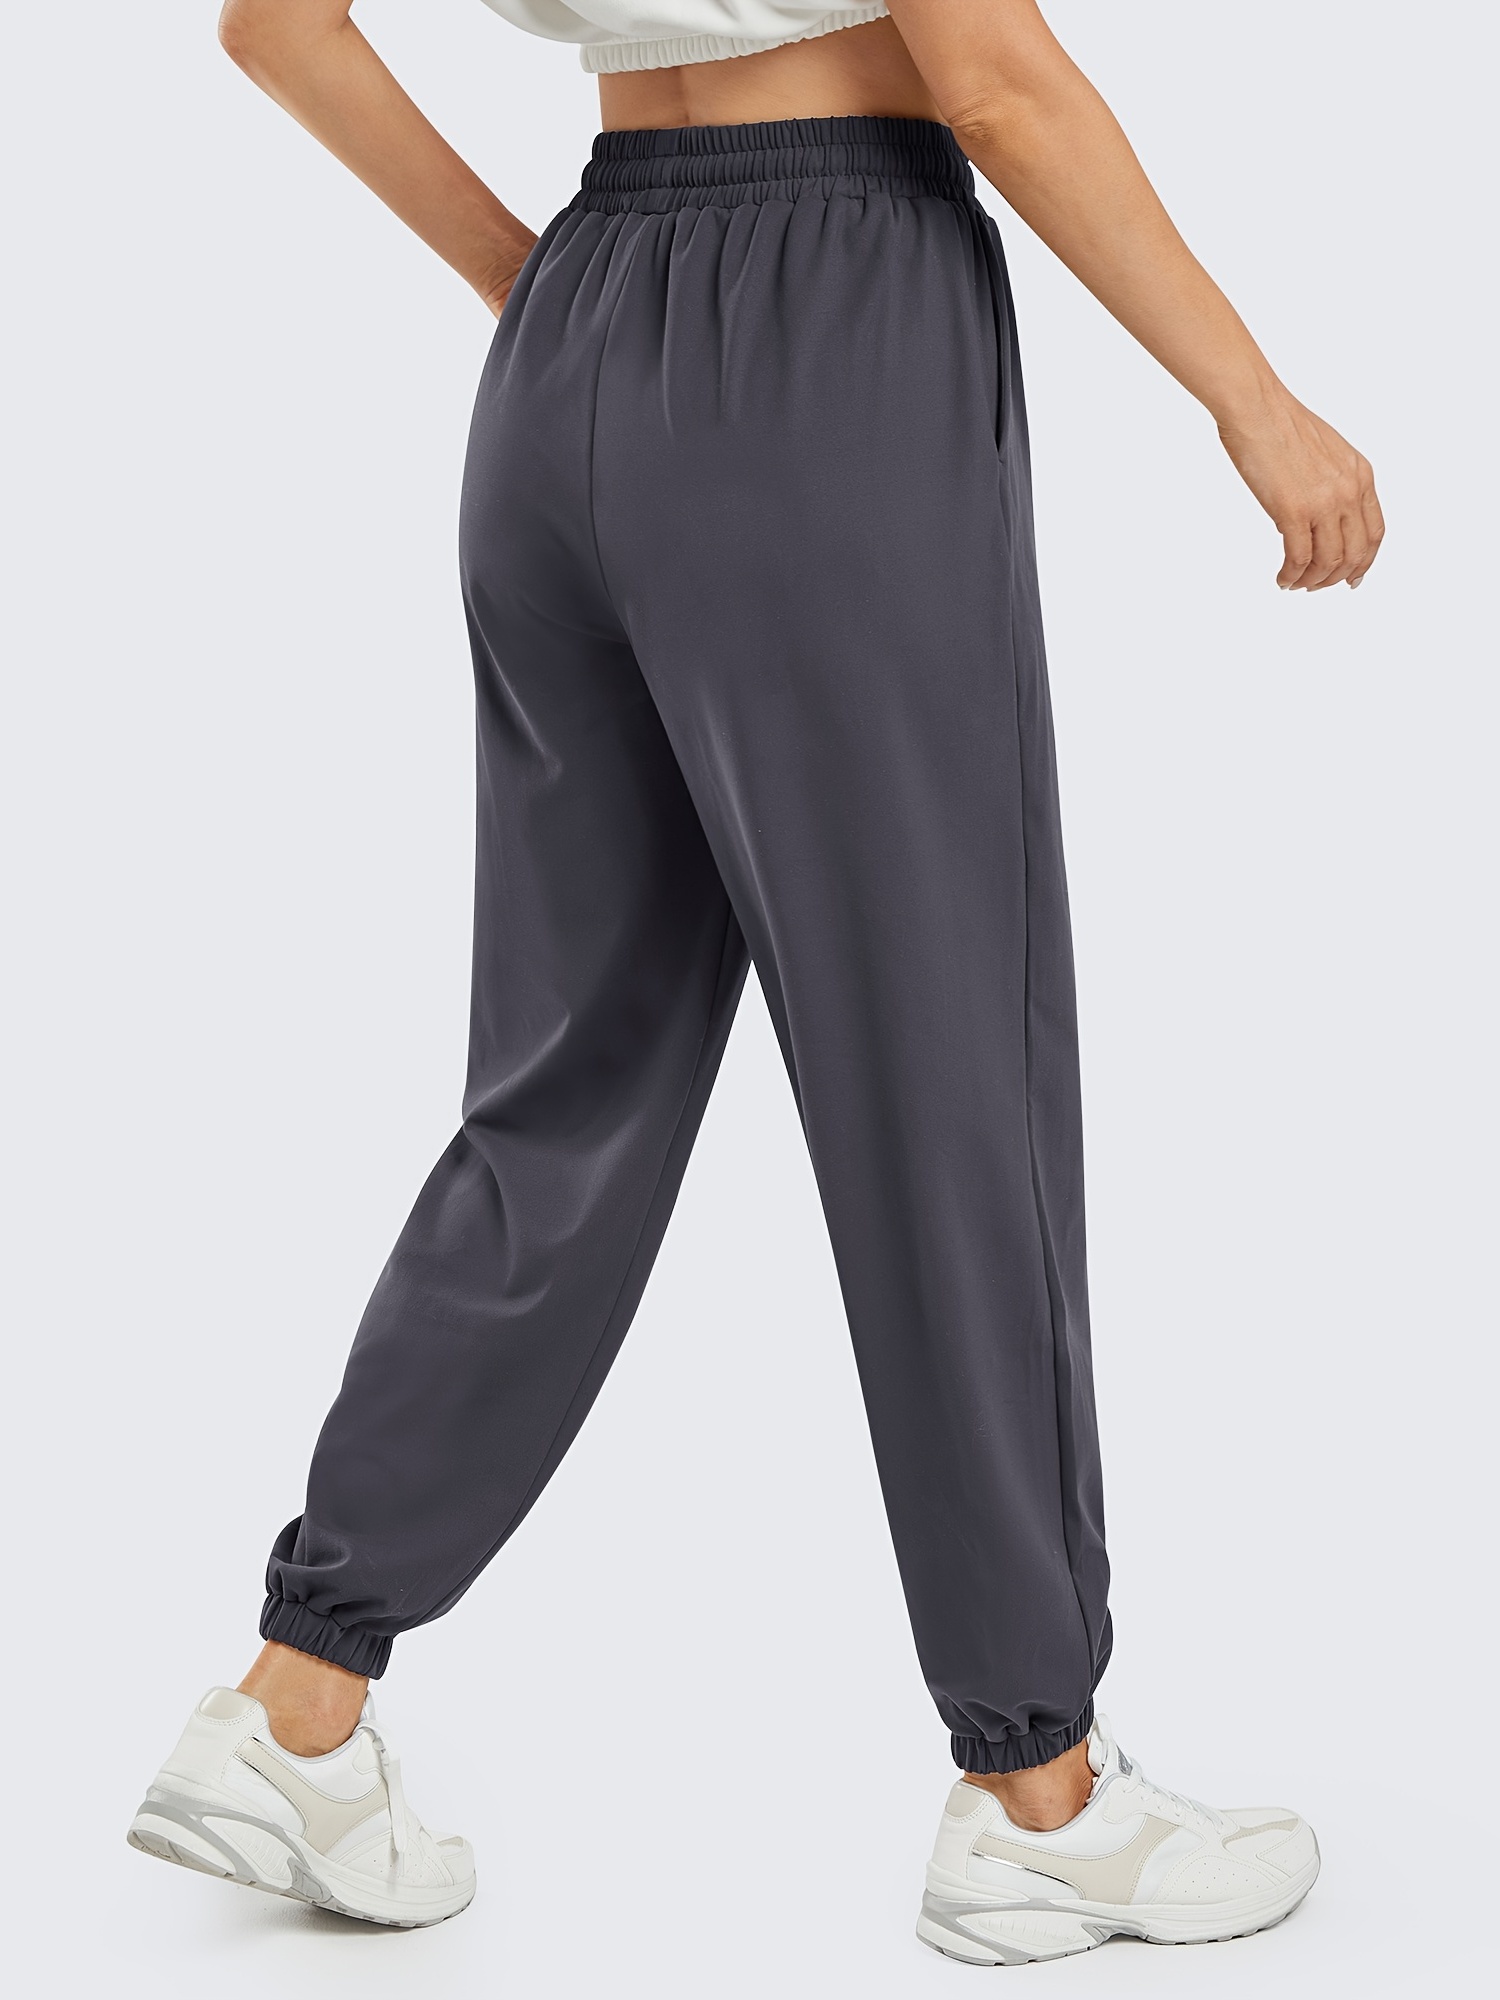 Womens Cinch Bottom Sweatpants With Pockets Striped Side Mid Waist Jogger  Pants Casual Workout Pants, Shop The Latest Trends